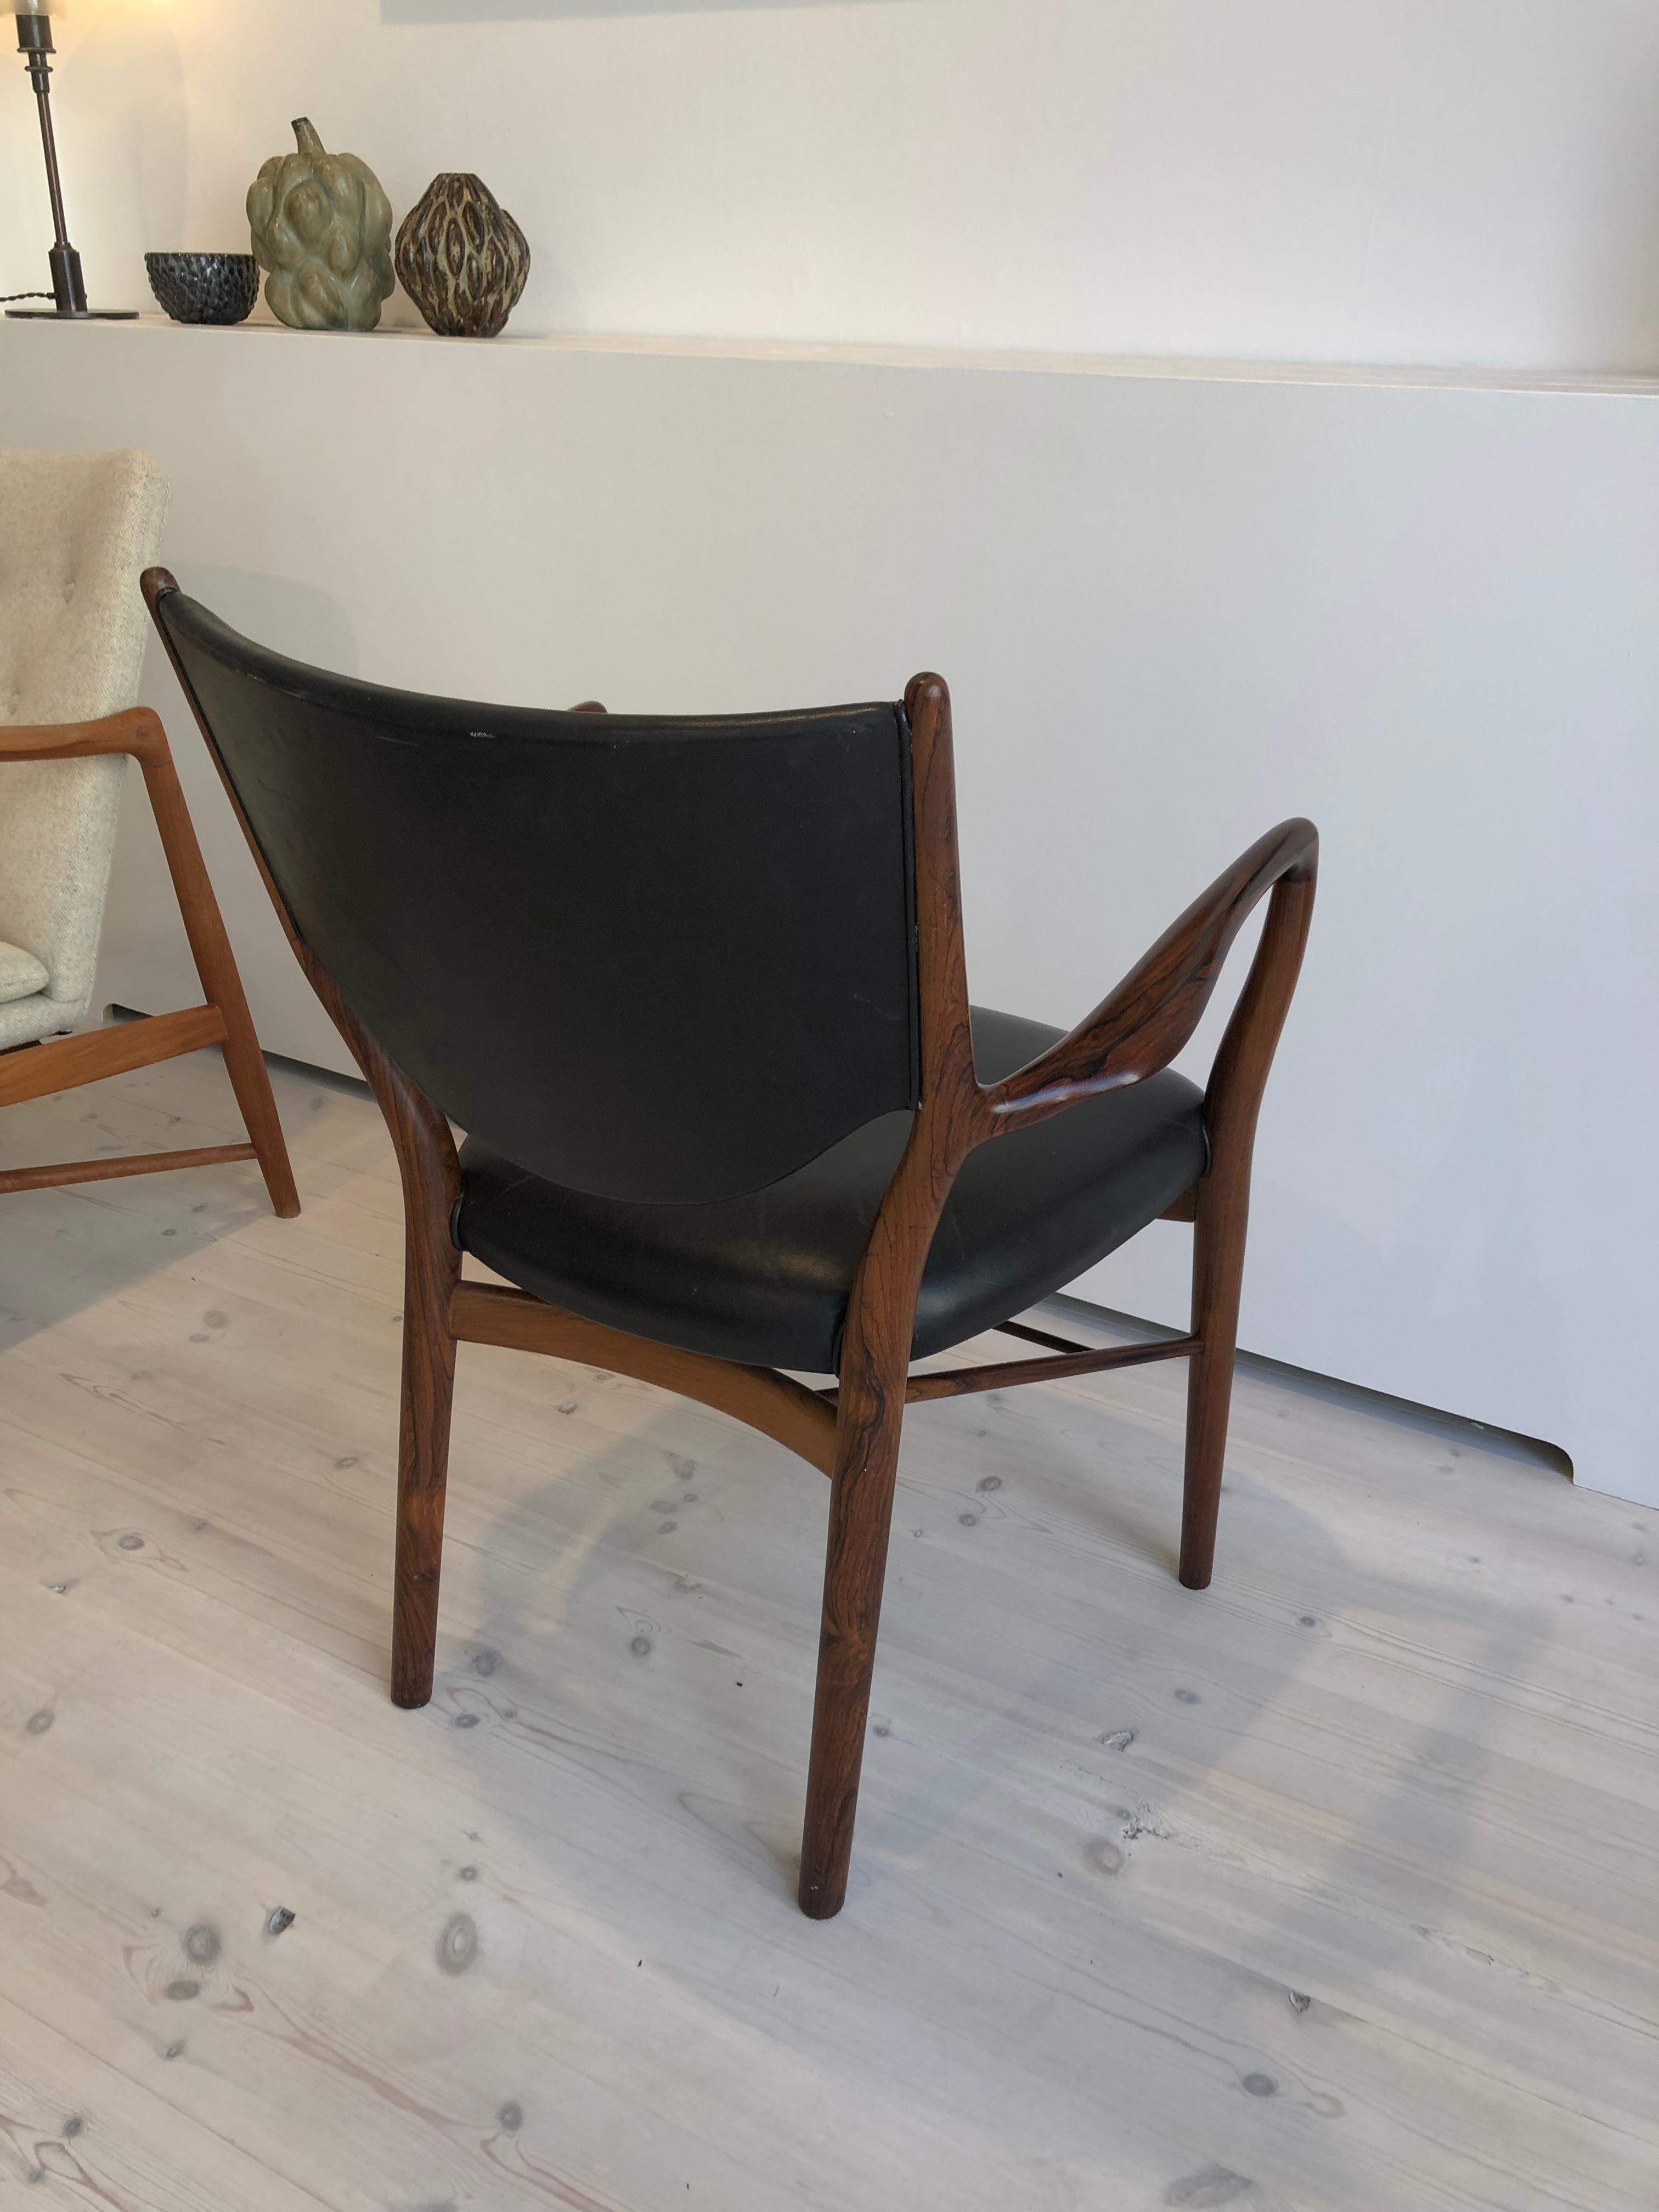 Finn Juhl Pair of NV46 Armchairs in Brazilian Rosewood for Niels Vodder, 1946 For Sale 6